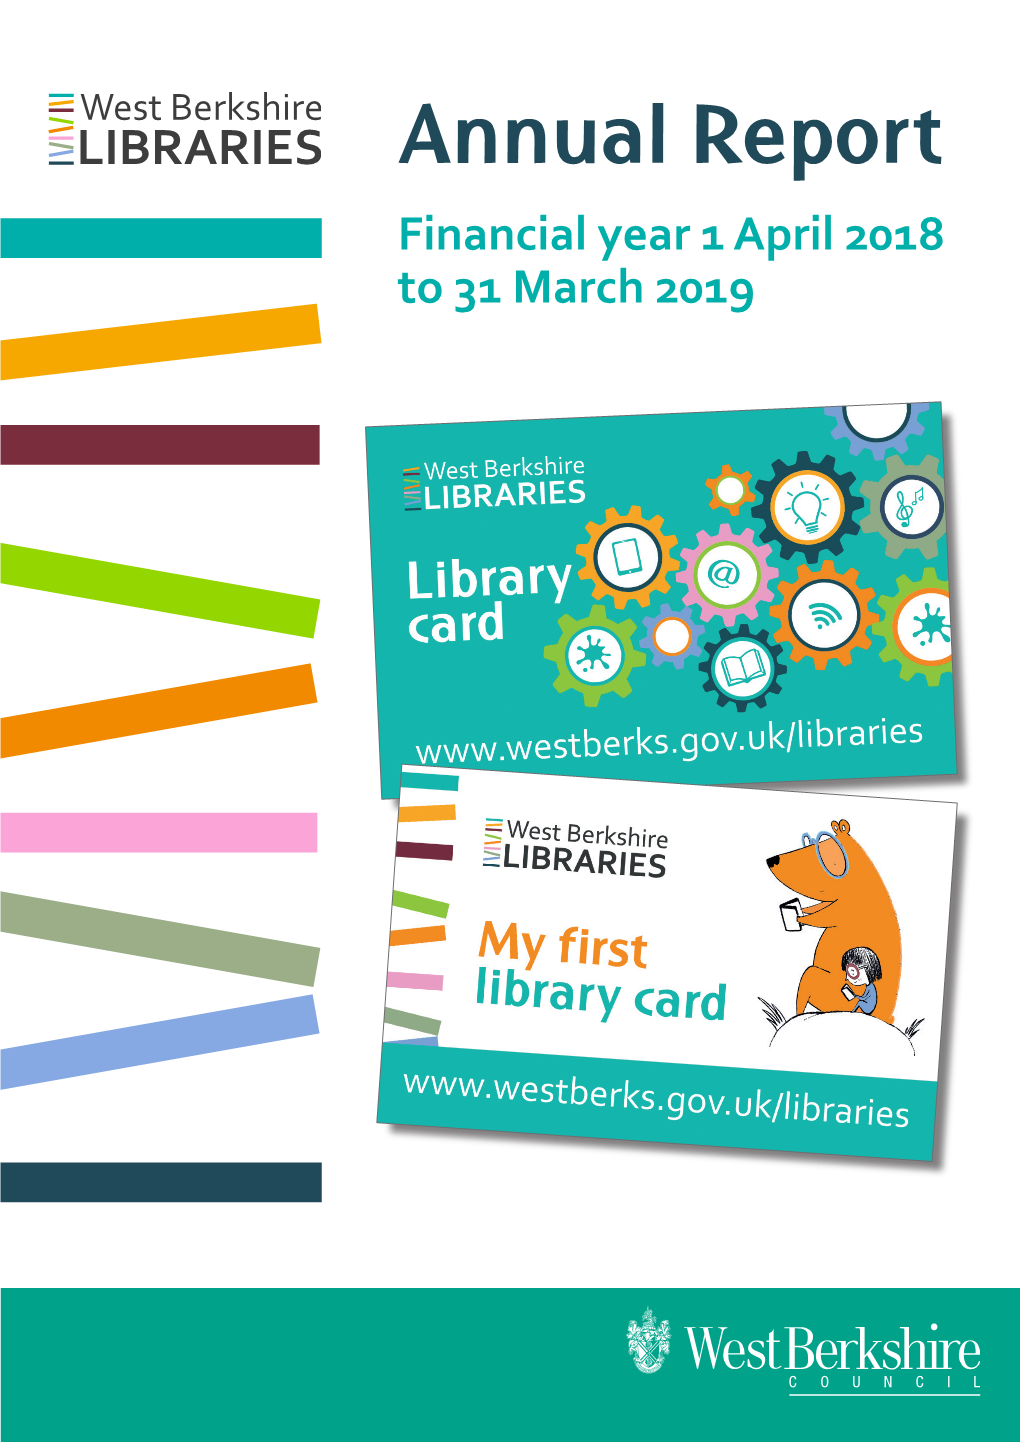 Annual Report Financial Year 1 April 2018 to 31 March 2019 Introduction